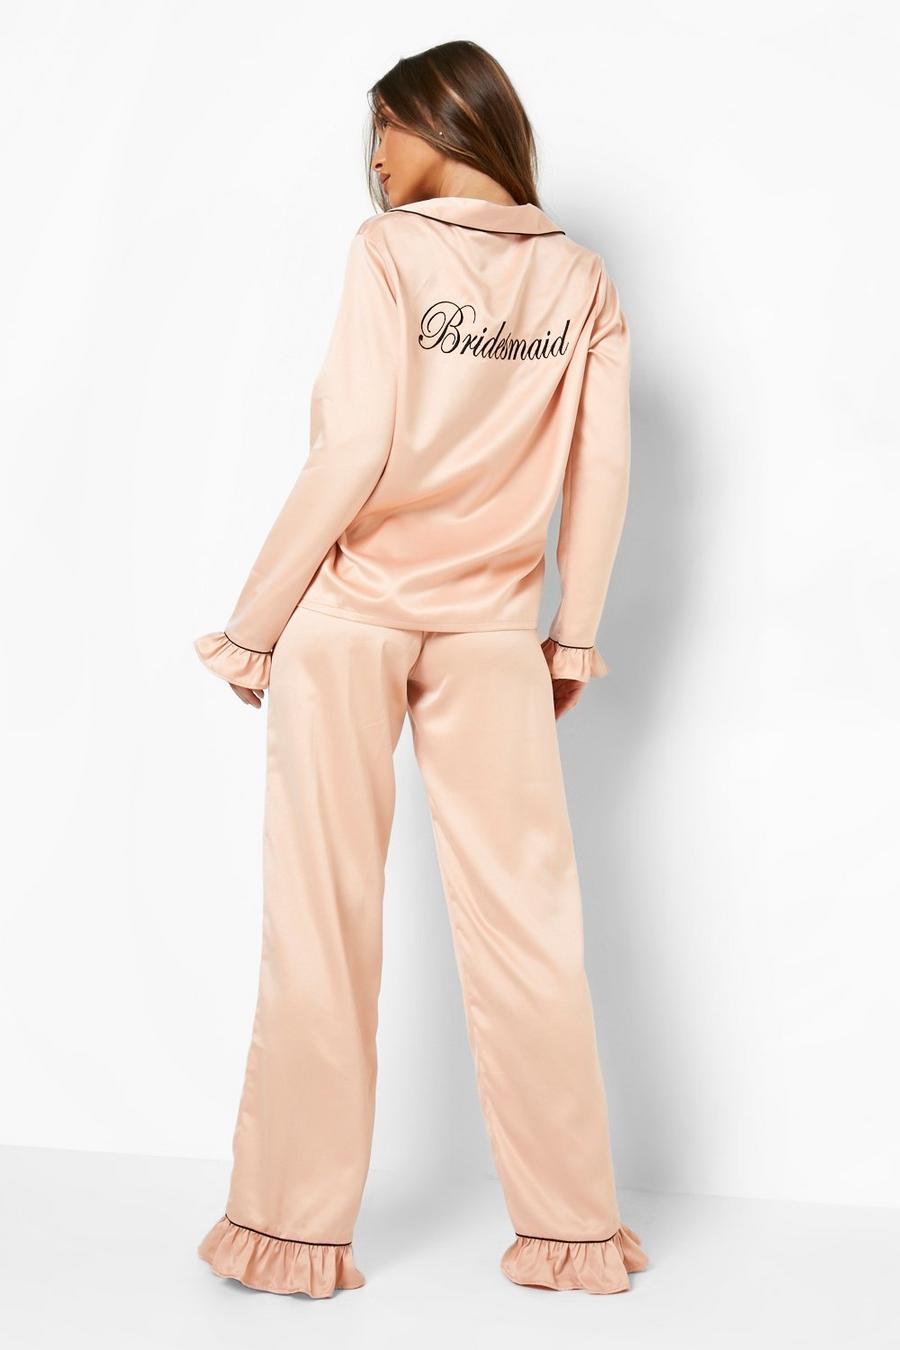 Rose gold metálicos Recycled Premium Bridesmaid Embroidery Frill Trouser Set 